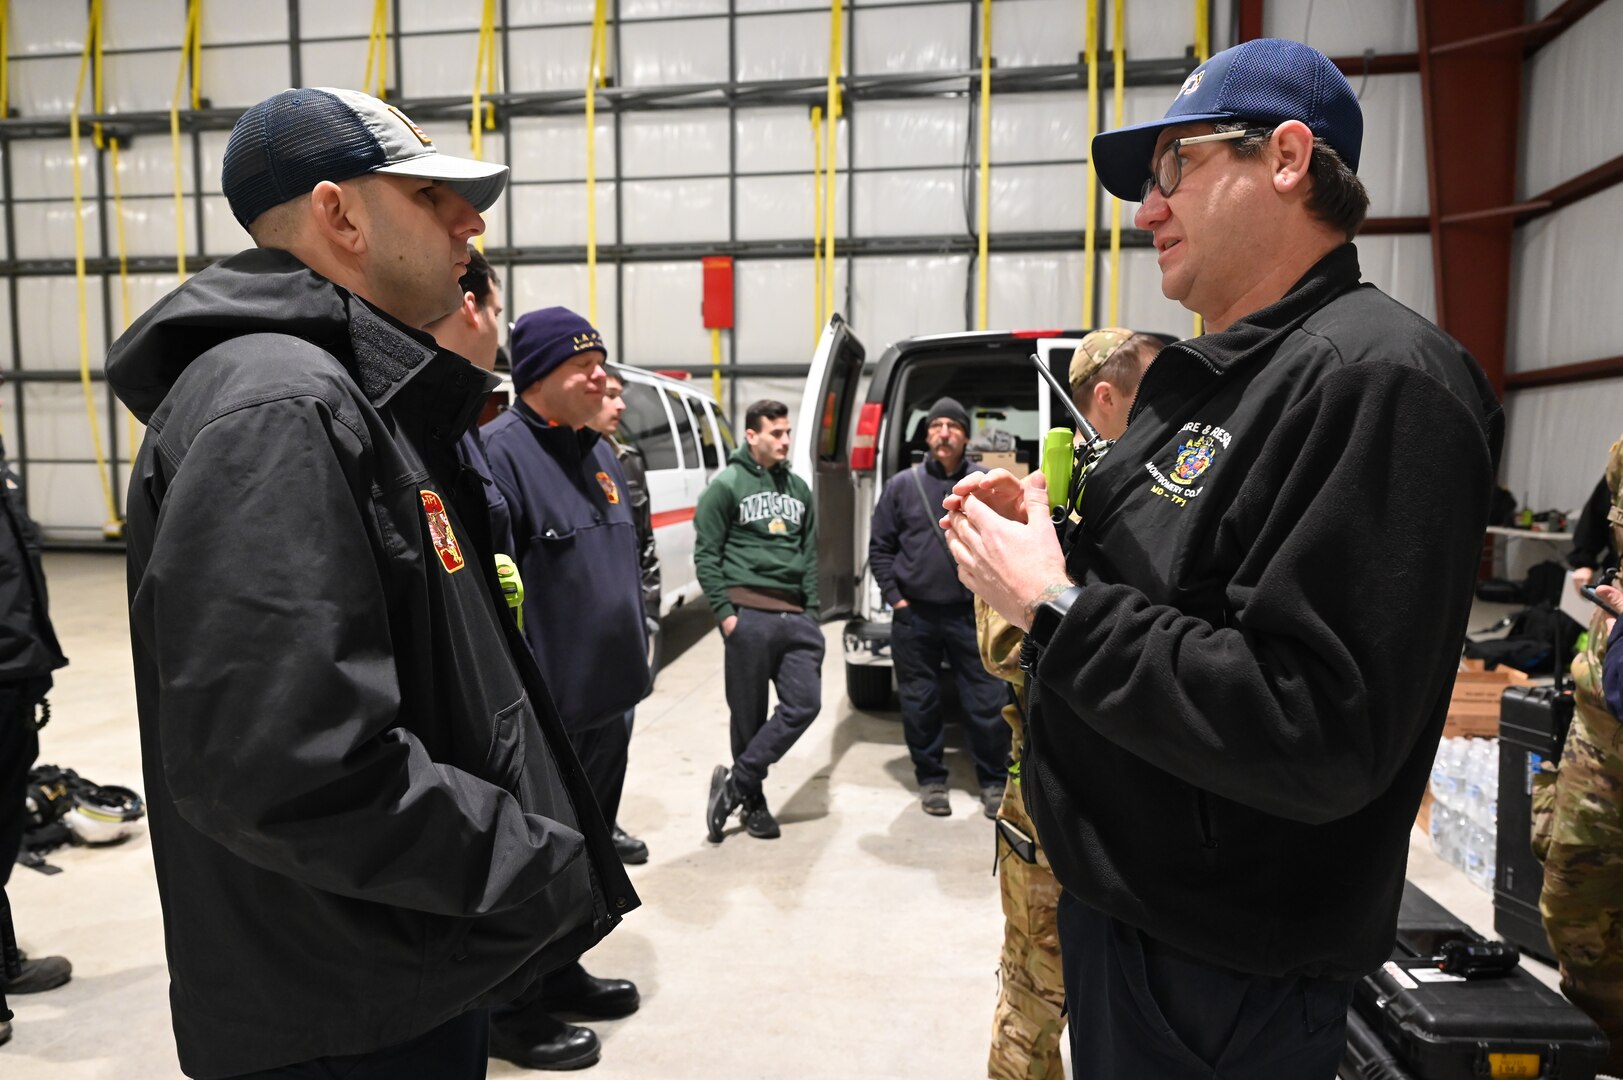 Maryland Task Force 1 (MD-TF1) and Virginia Task Force 1 (VA-TF1) of the Federal Emergency Management Agency (FMEA) train during an Urban Search and Rescue Task Force exercise, at Montgomery County Airpark and Public Safety Training Academy (PSTA), Feb. 15, 2024. The training represents a new partnership for members of the D.C. National Guard’s Aviation Detachment, nicknamed District Dustoff, designed to improve interoperability and familiarity between partners involved in disaster response in the DMV.